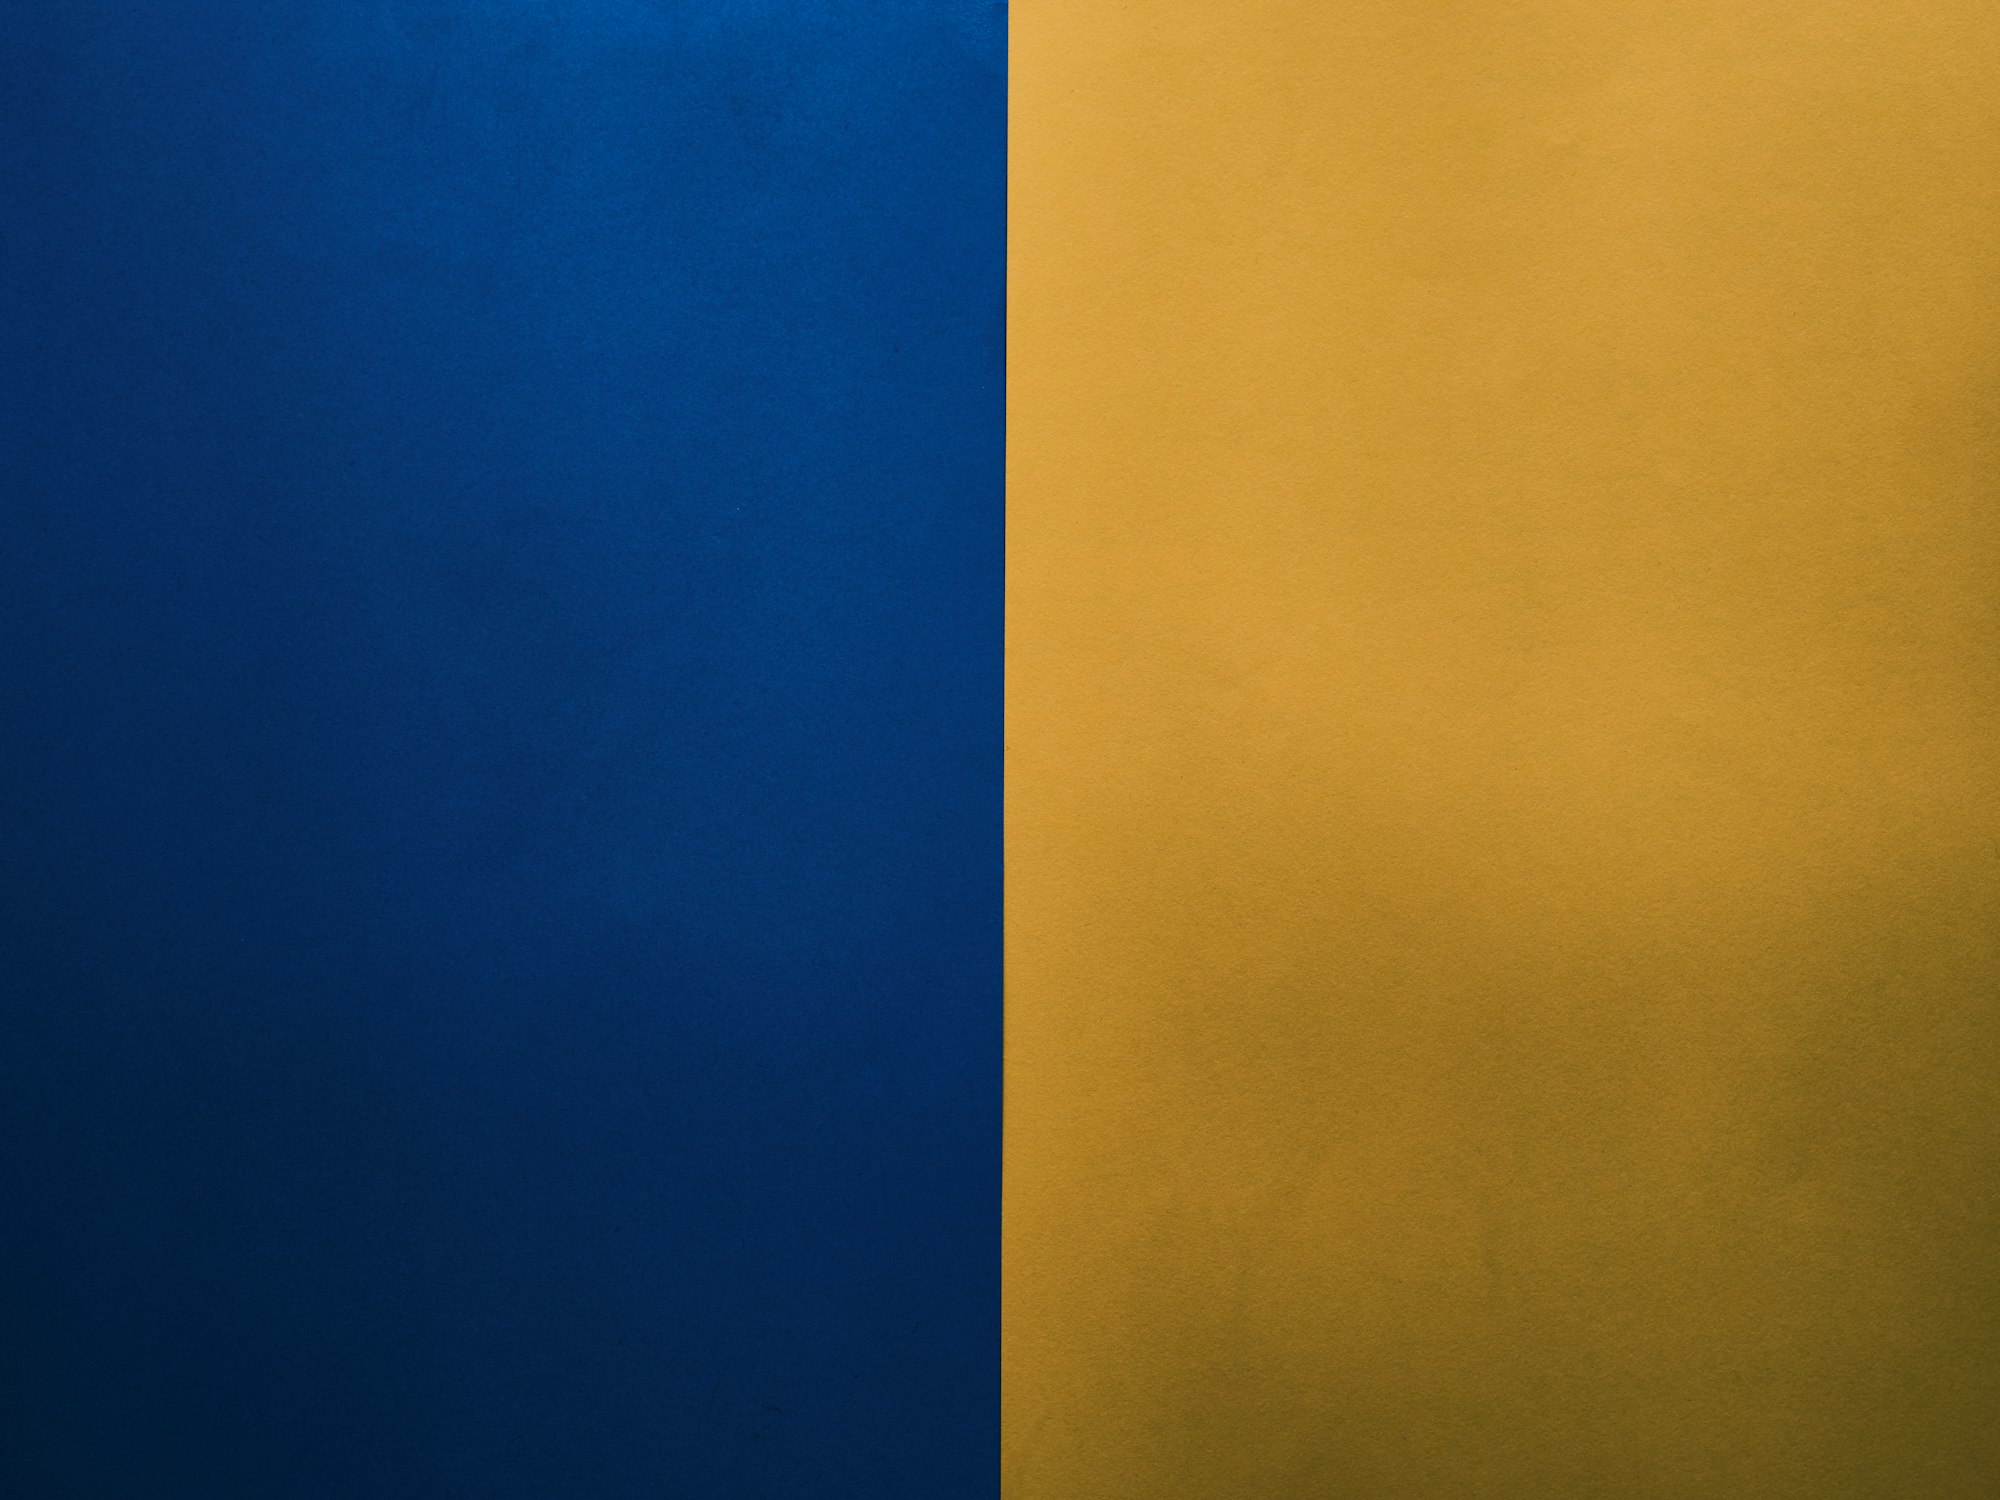 Colors of the flag of the country of free Ukraine